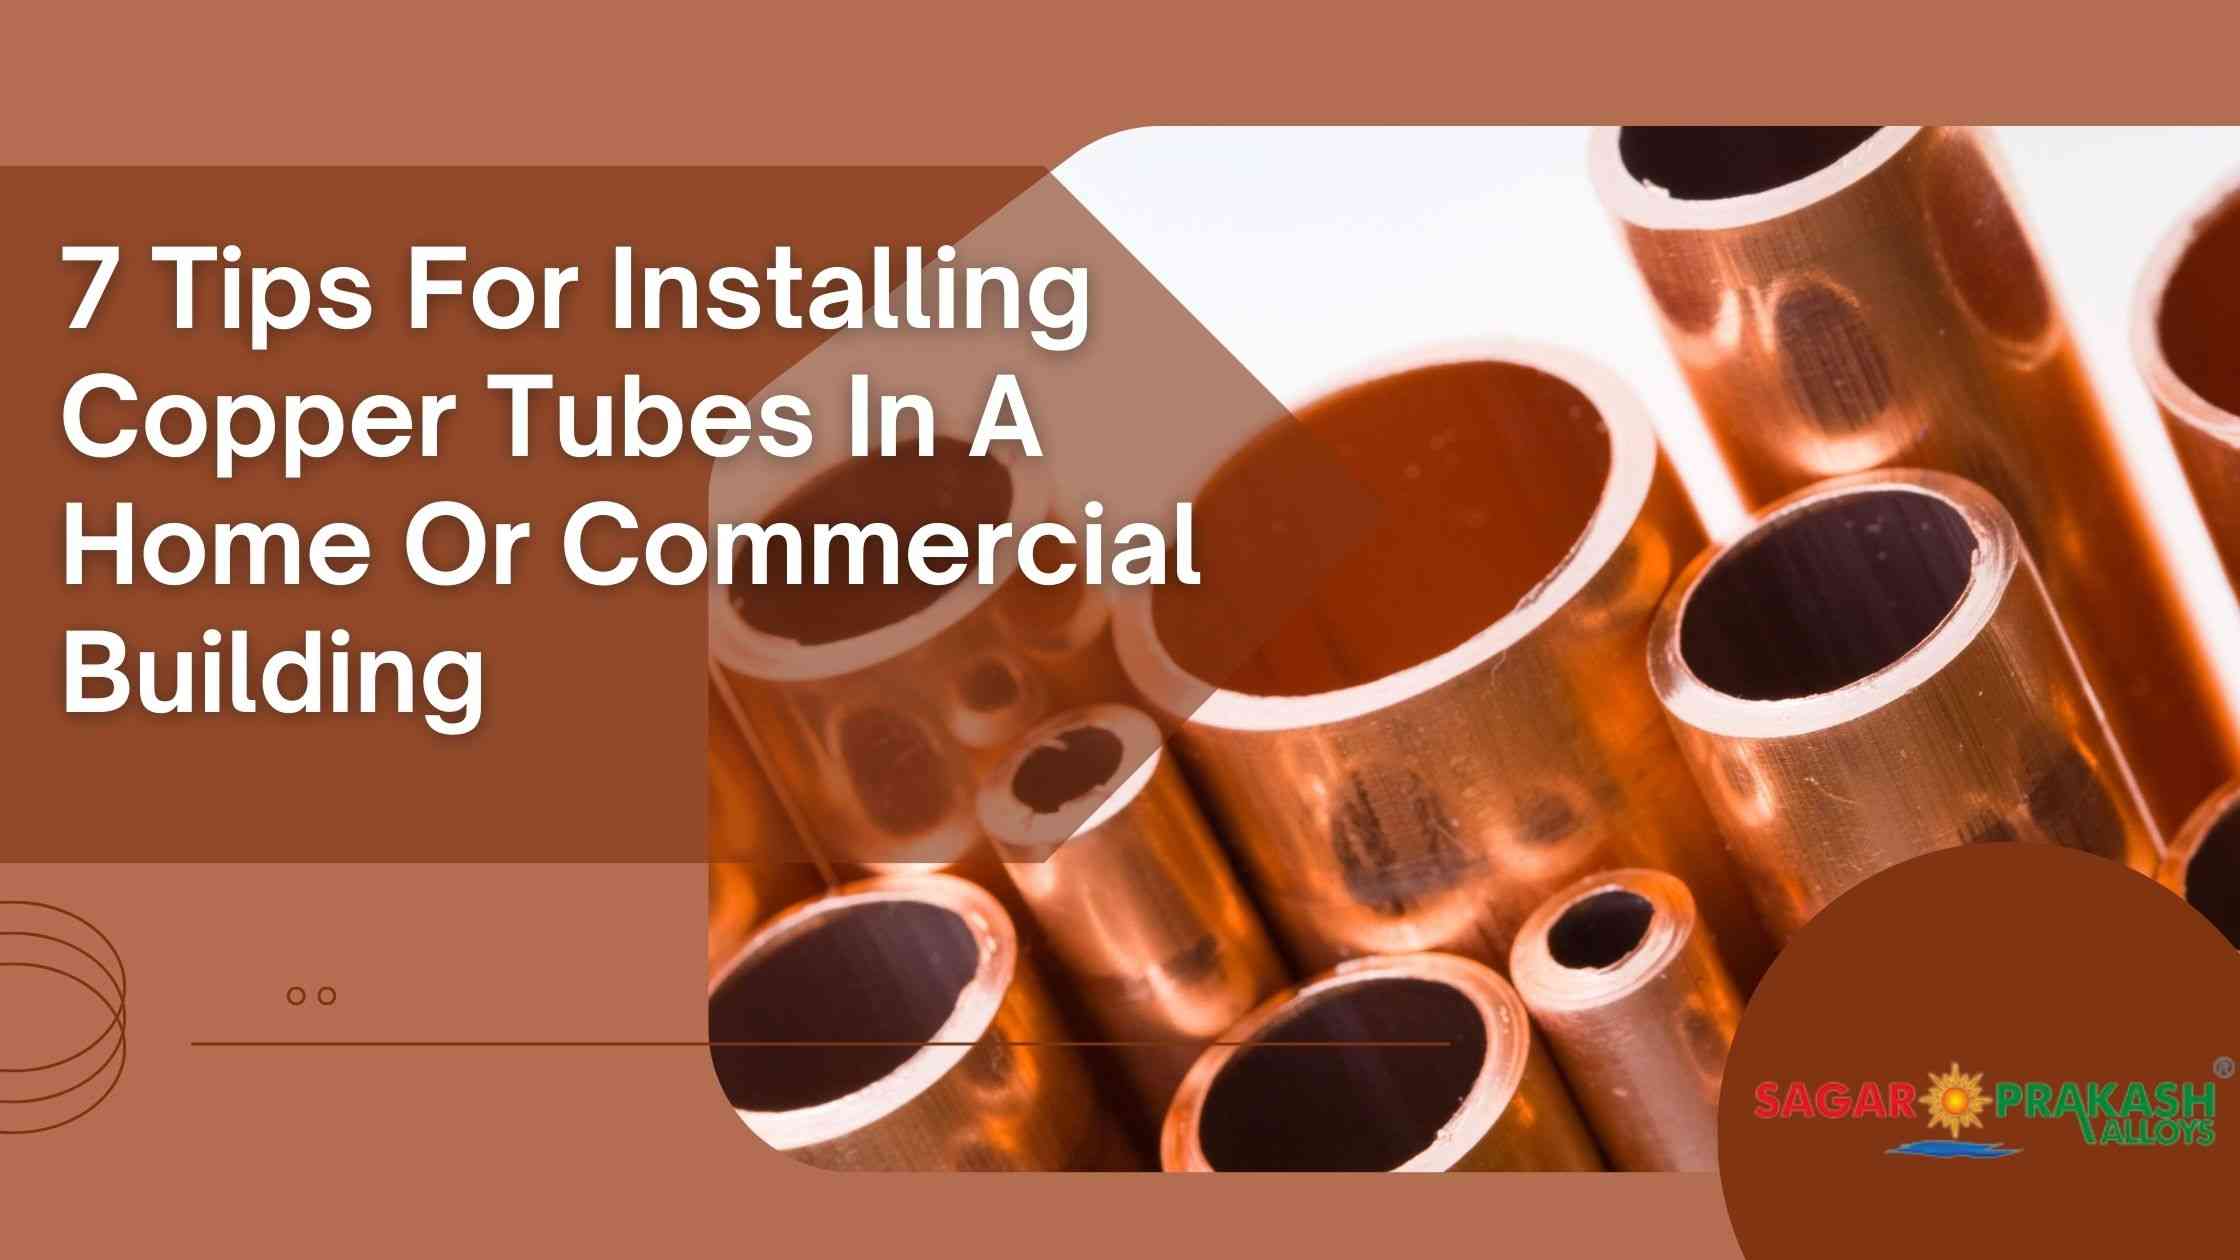 7 Tips For Installing Copper Tubes In A Home Or Commercial Building